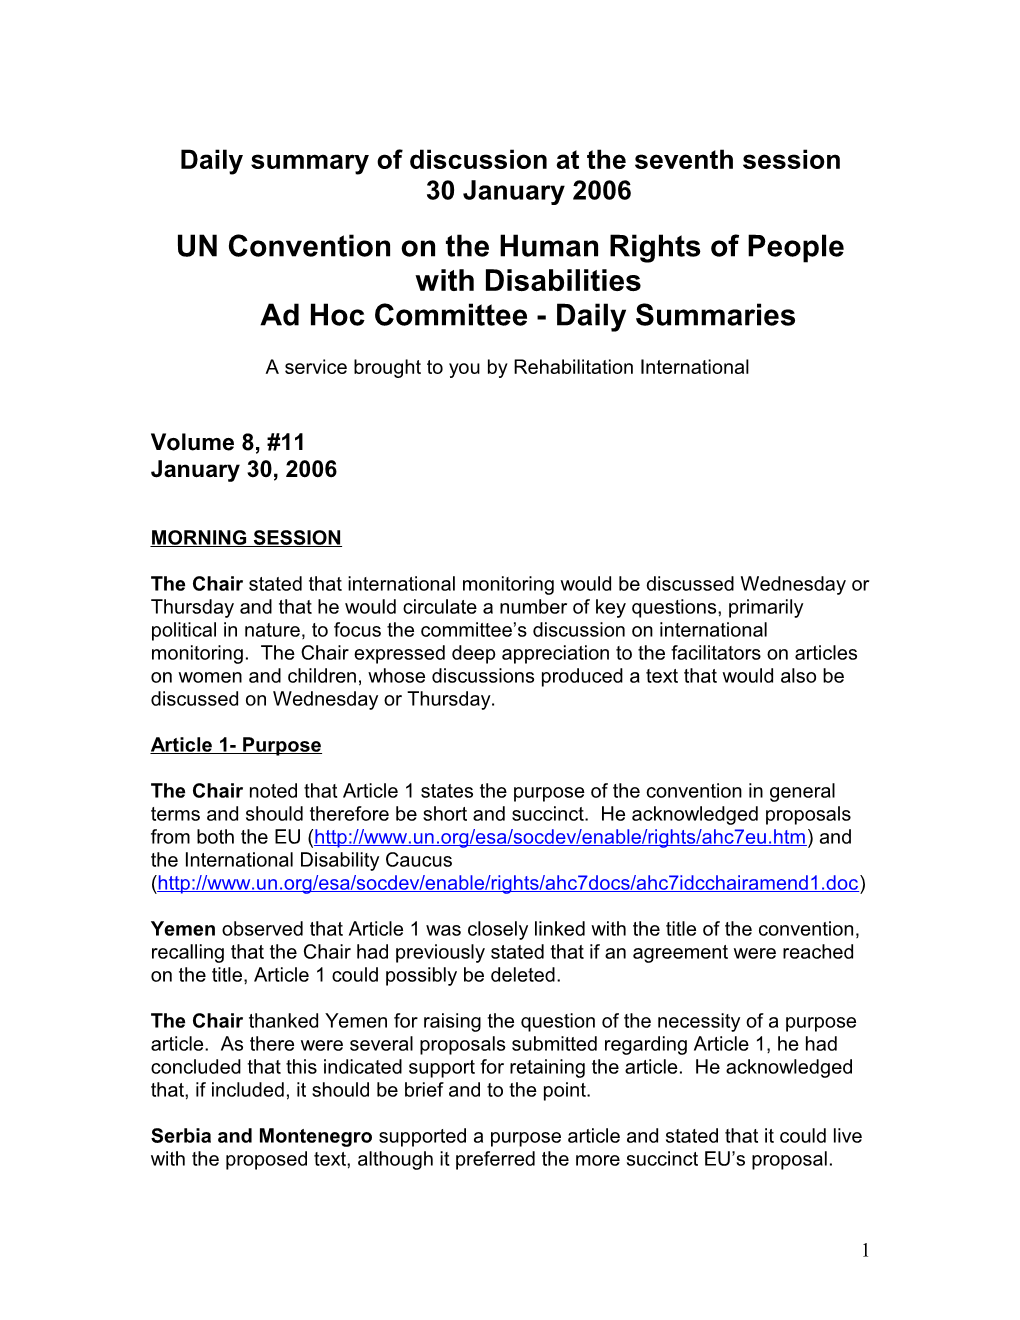 Un Convention on Rights of People with Disabilities